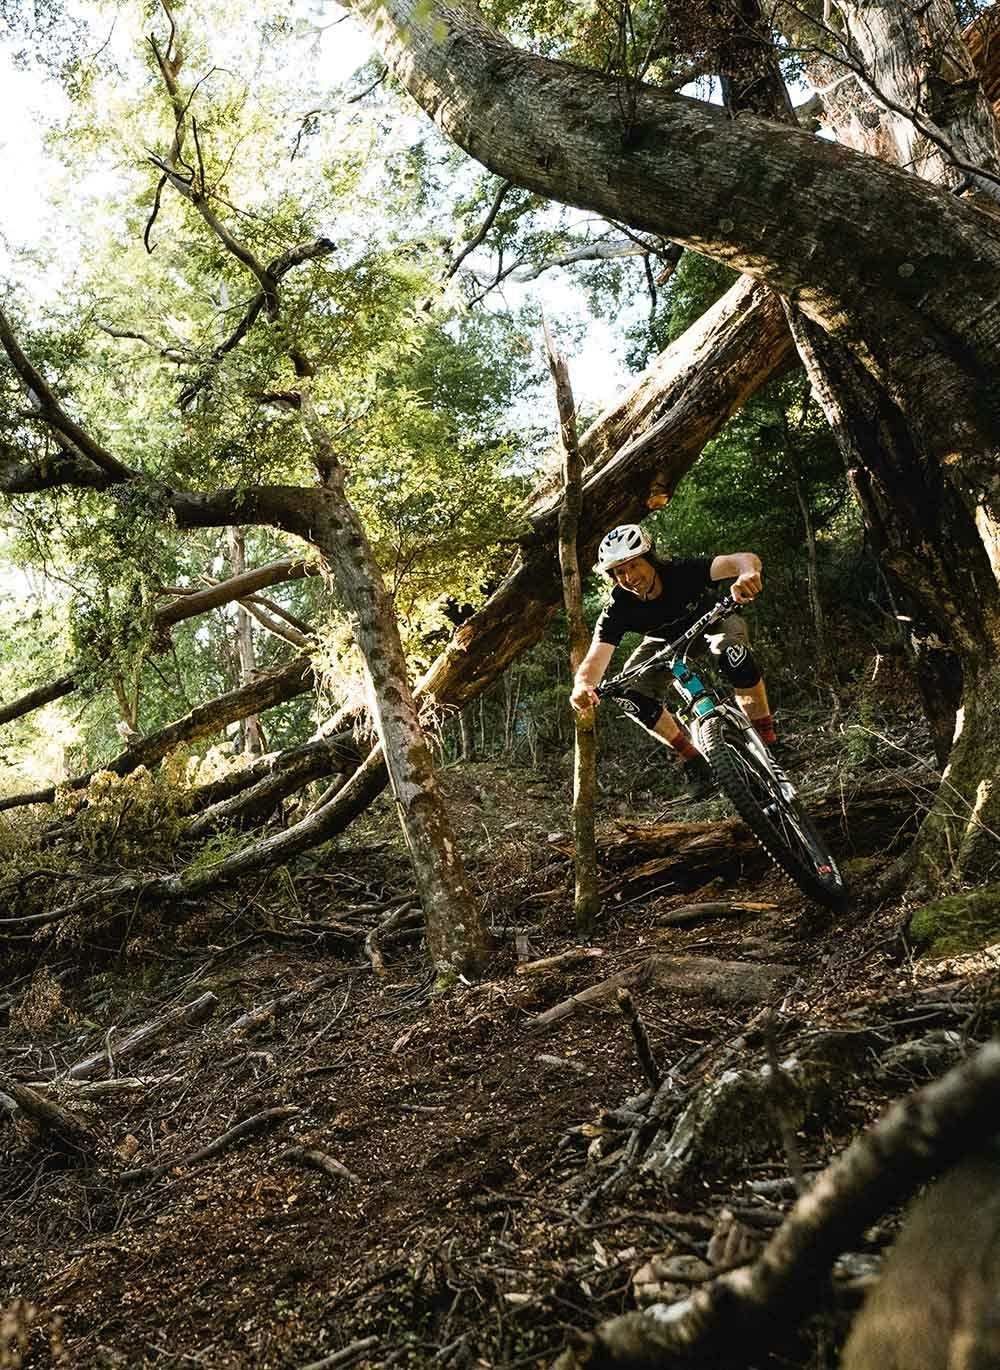 Tom Hey riding his mountain bike on forest trails